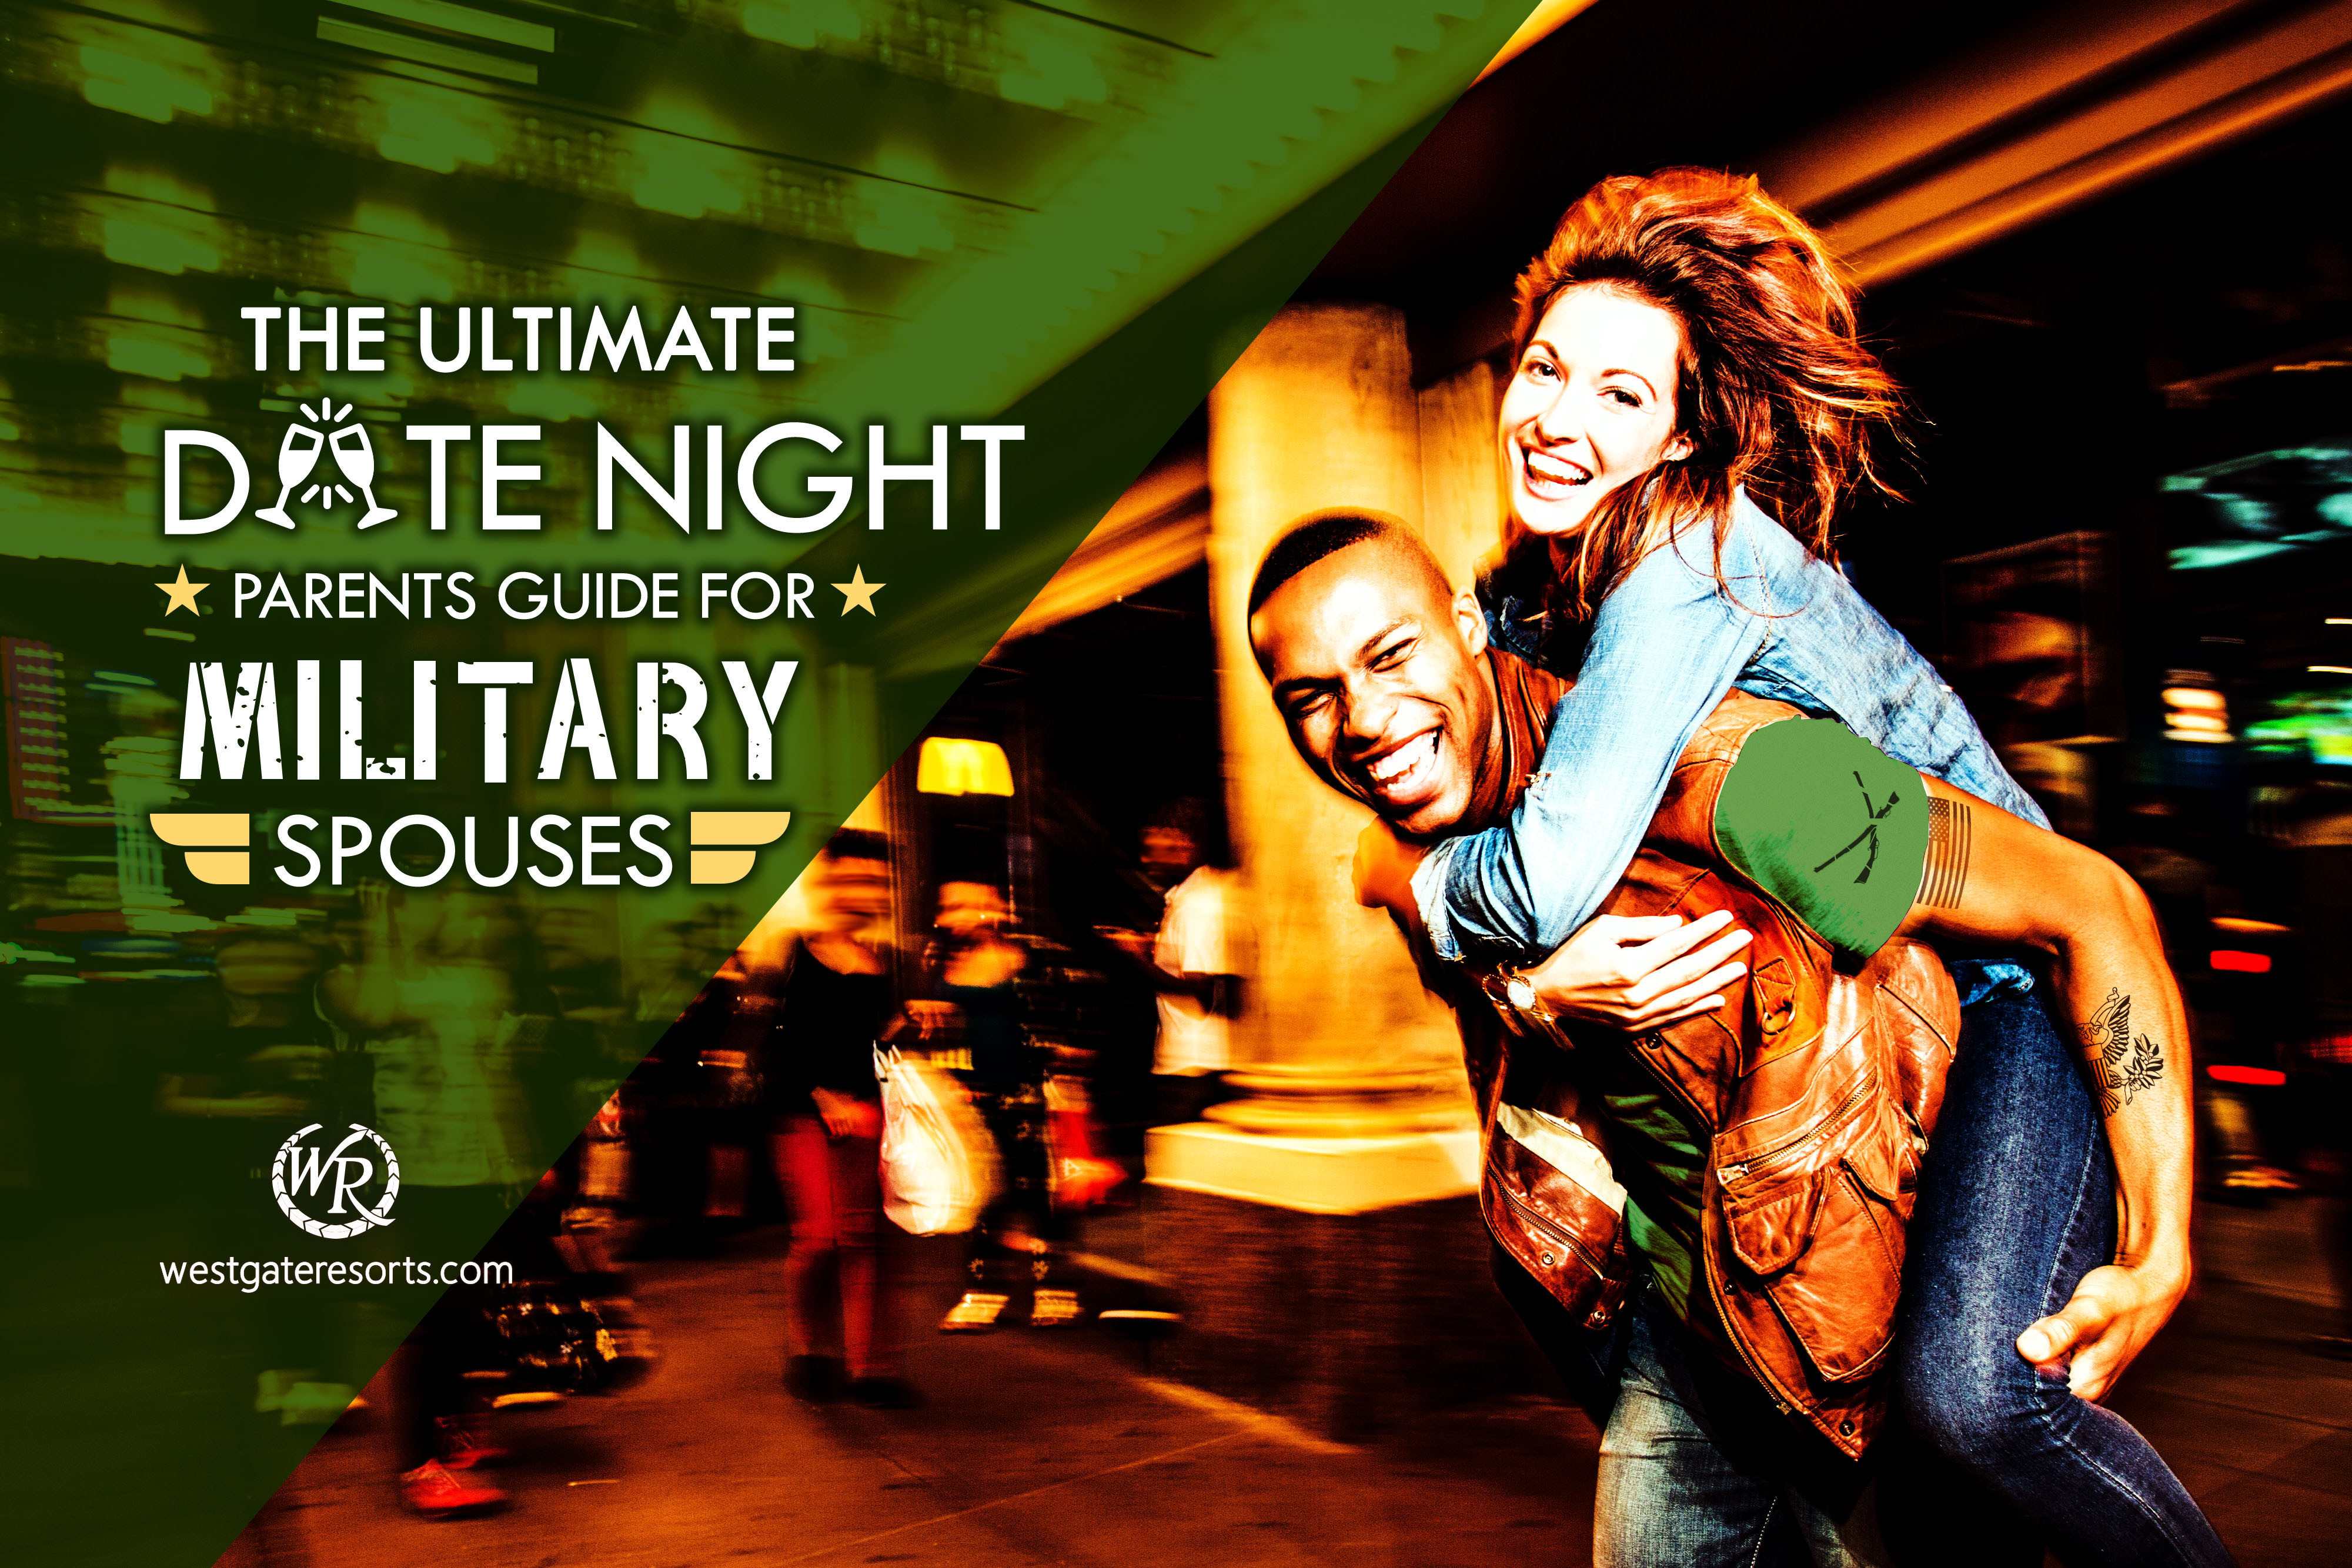 The Ultimate Date Night Parents Guide for Military Spouses